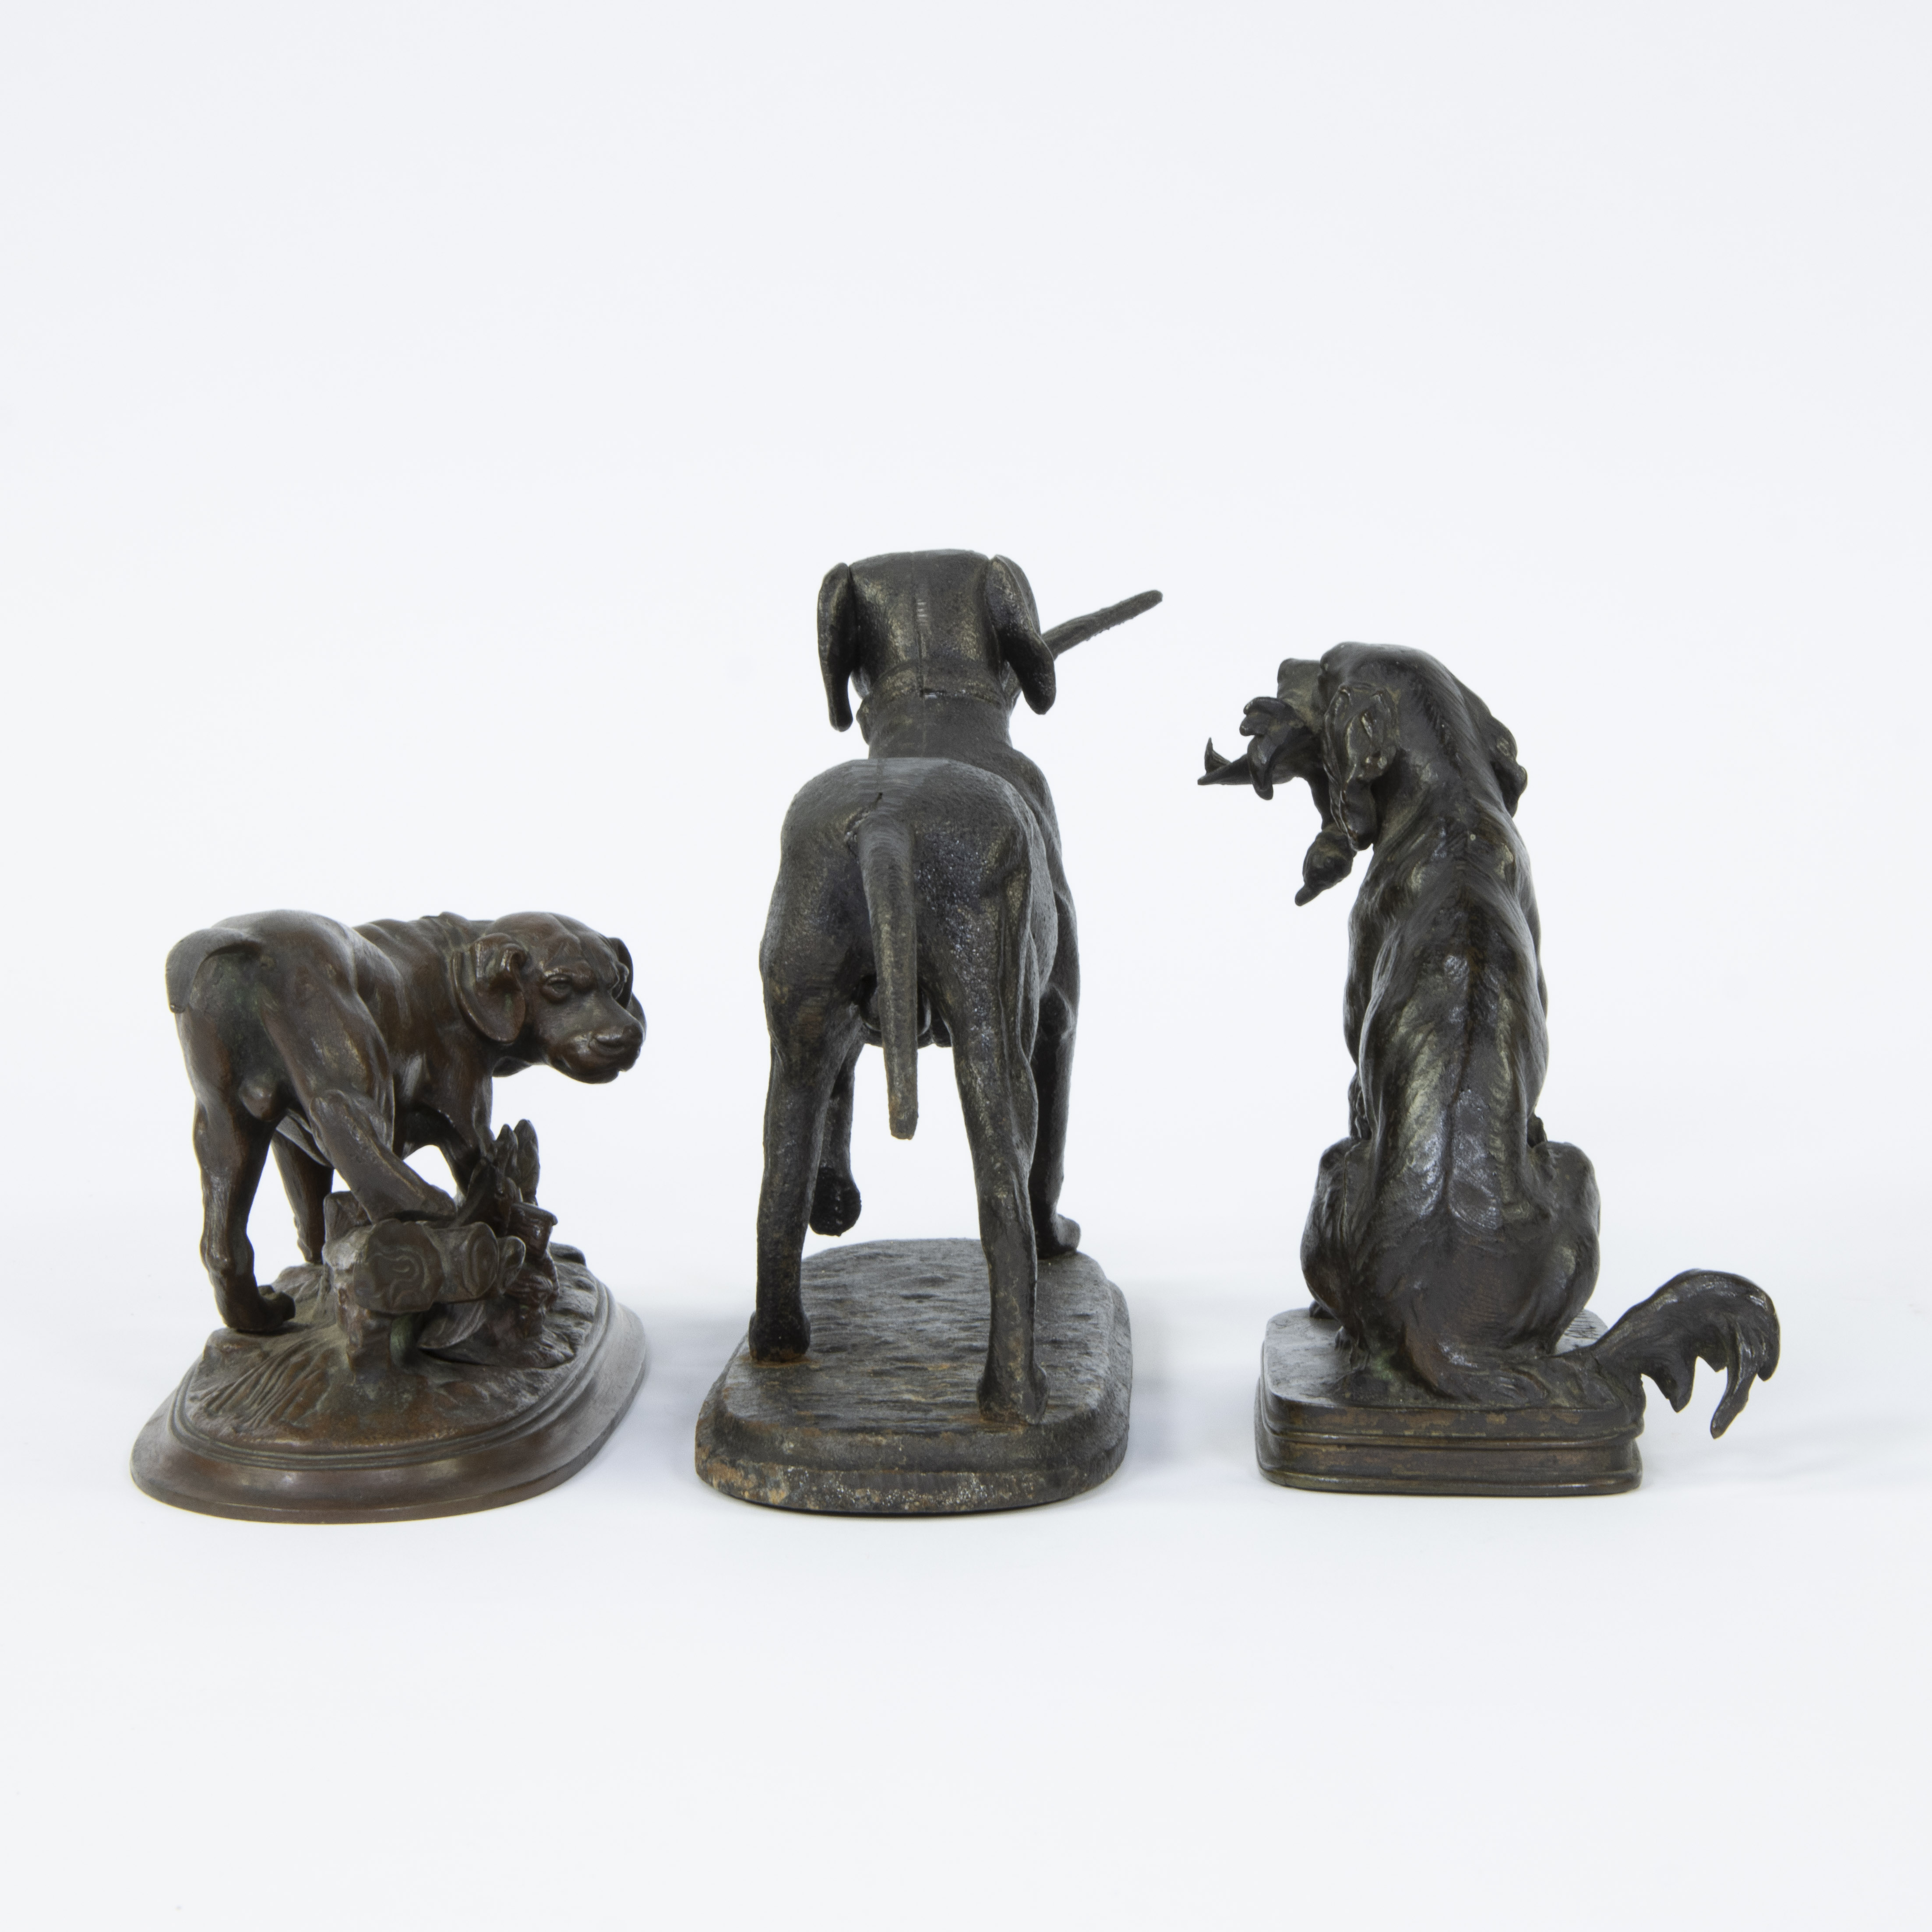 Ferdinand PAUTROT (1832-1874), bronze of a hunting dog, drawn and added hunting dog in cast iron and - Image 4 of 5